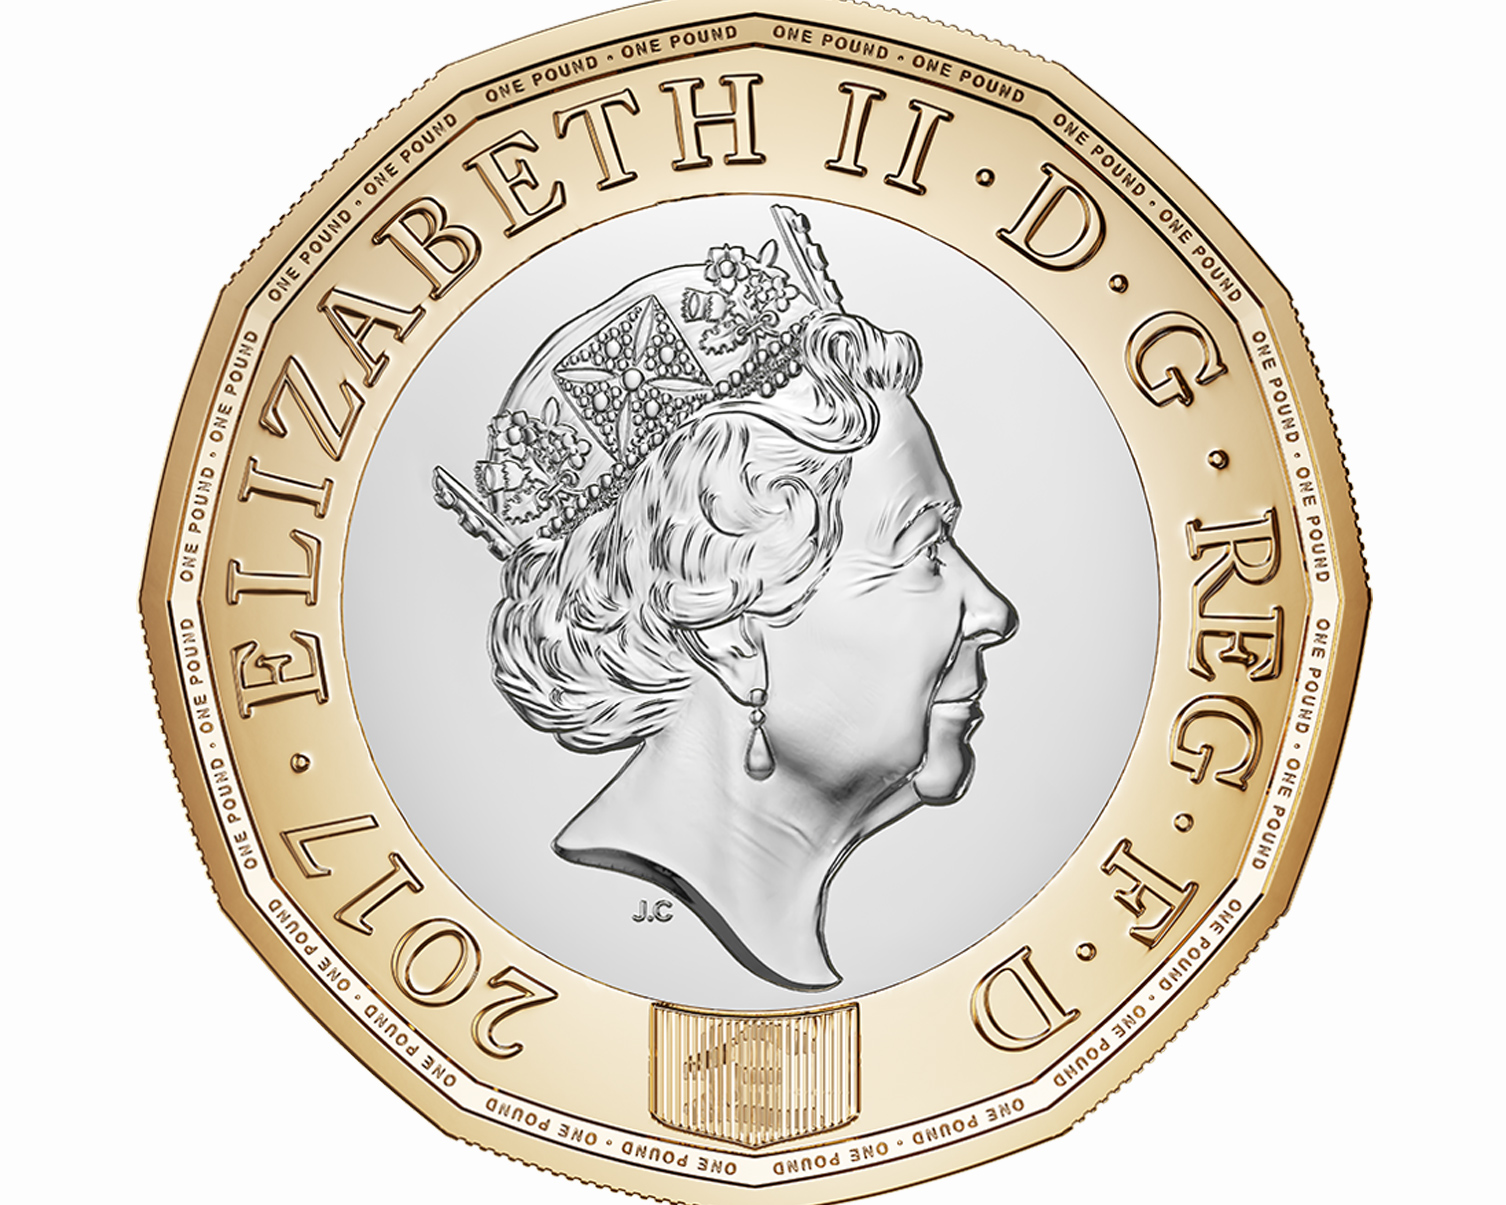 The UK’s new pound coin has a secret, hightech security feature BGR